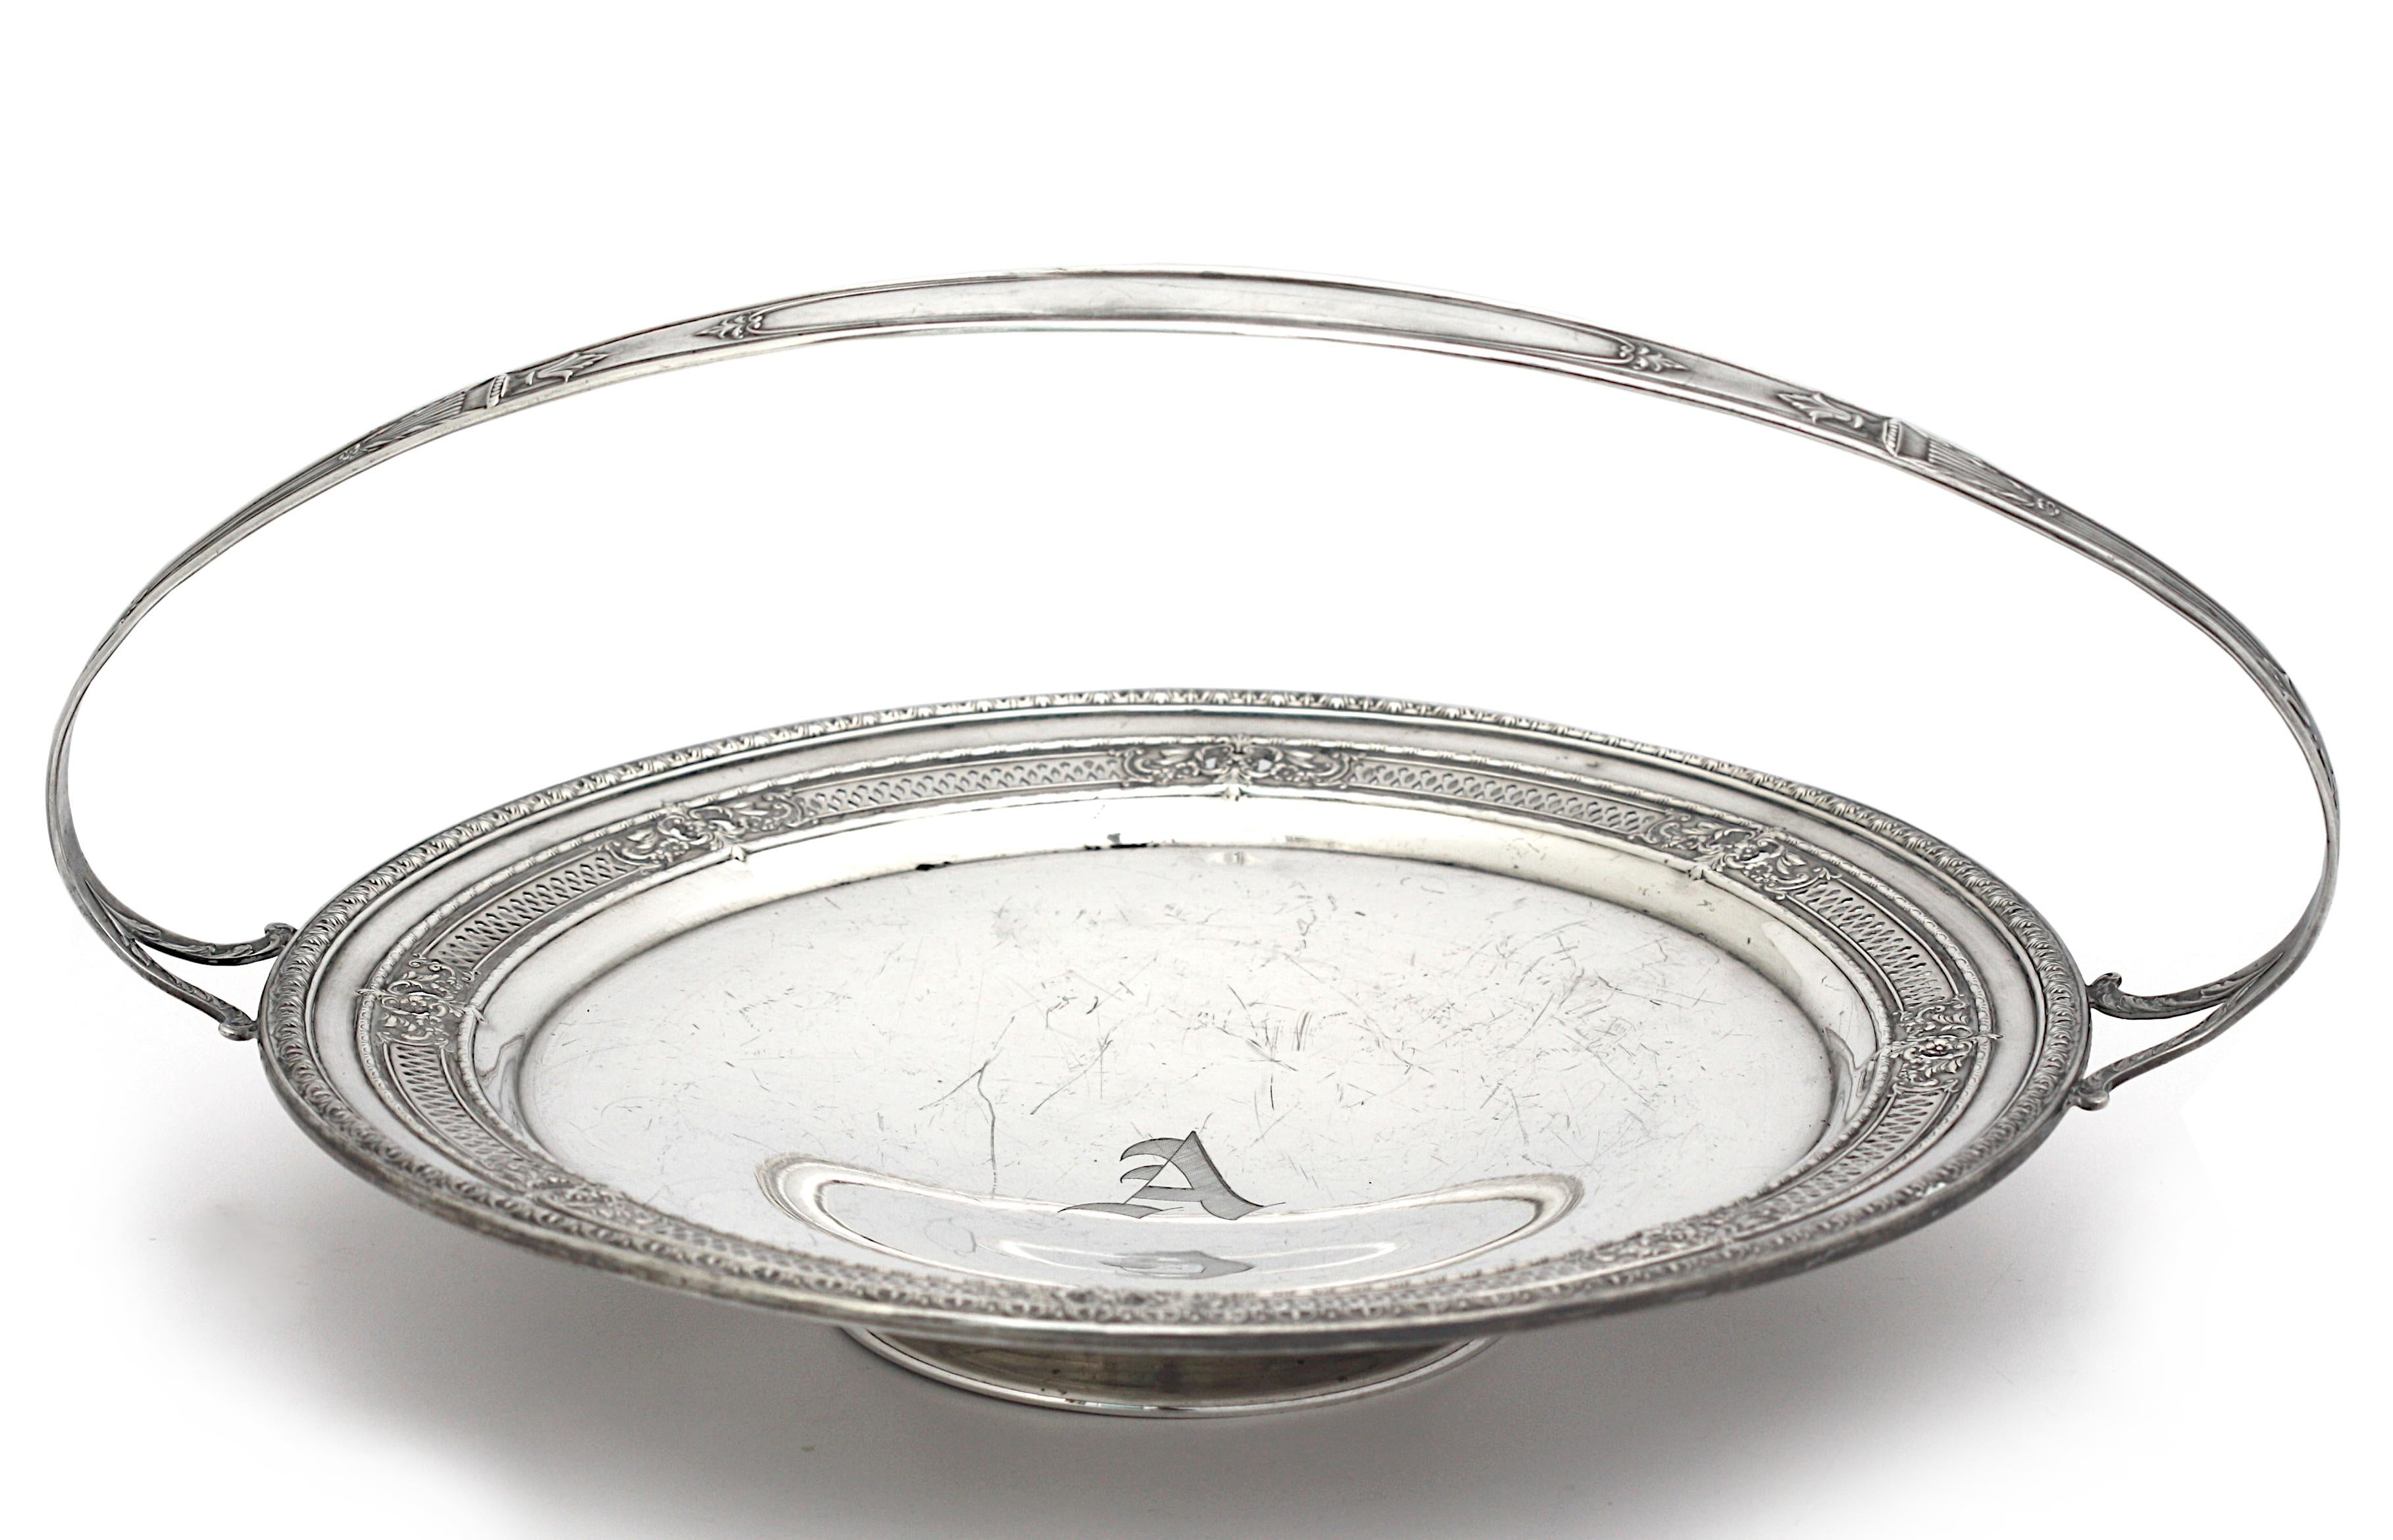 
American Sterling Silver Footed Dessert Basket
Marked International Sterling H15-1A. The pierced circular tray chased with flowerheads and leaf scrolls, with a loop handle and circular foot.
Height 6.75 in., Diameter 10 in., 14.7 troy oz.